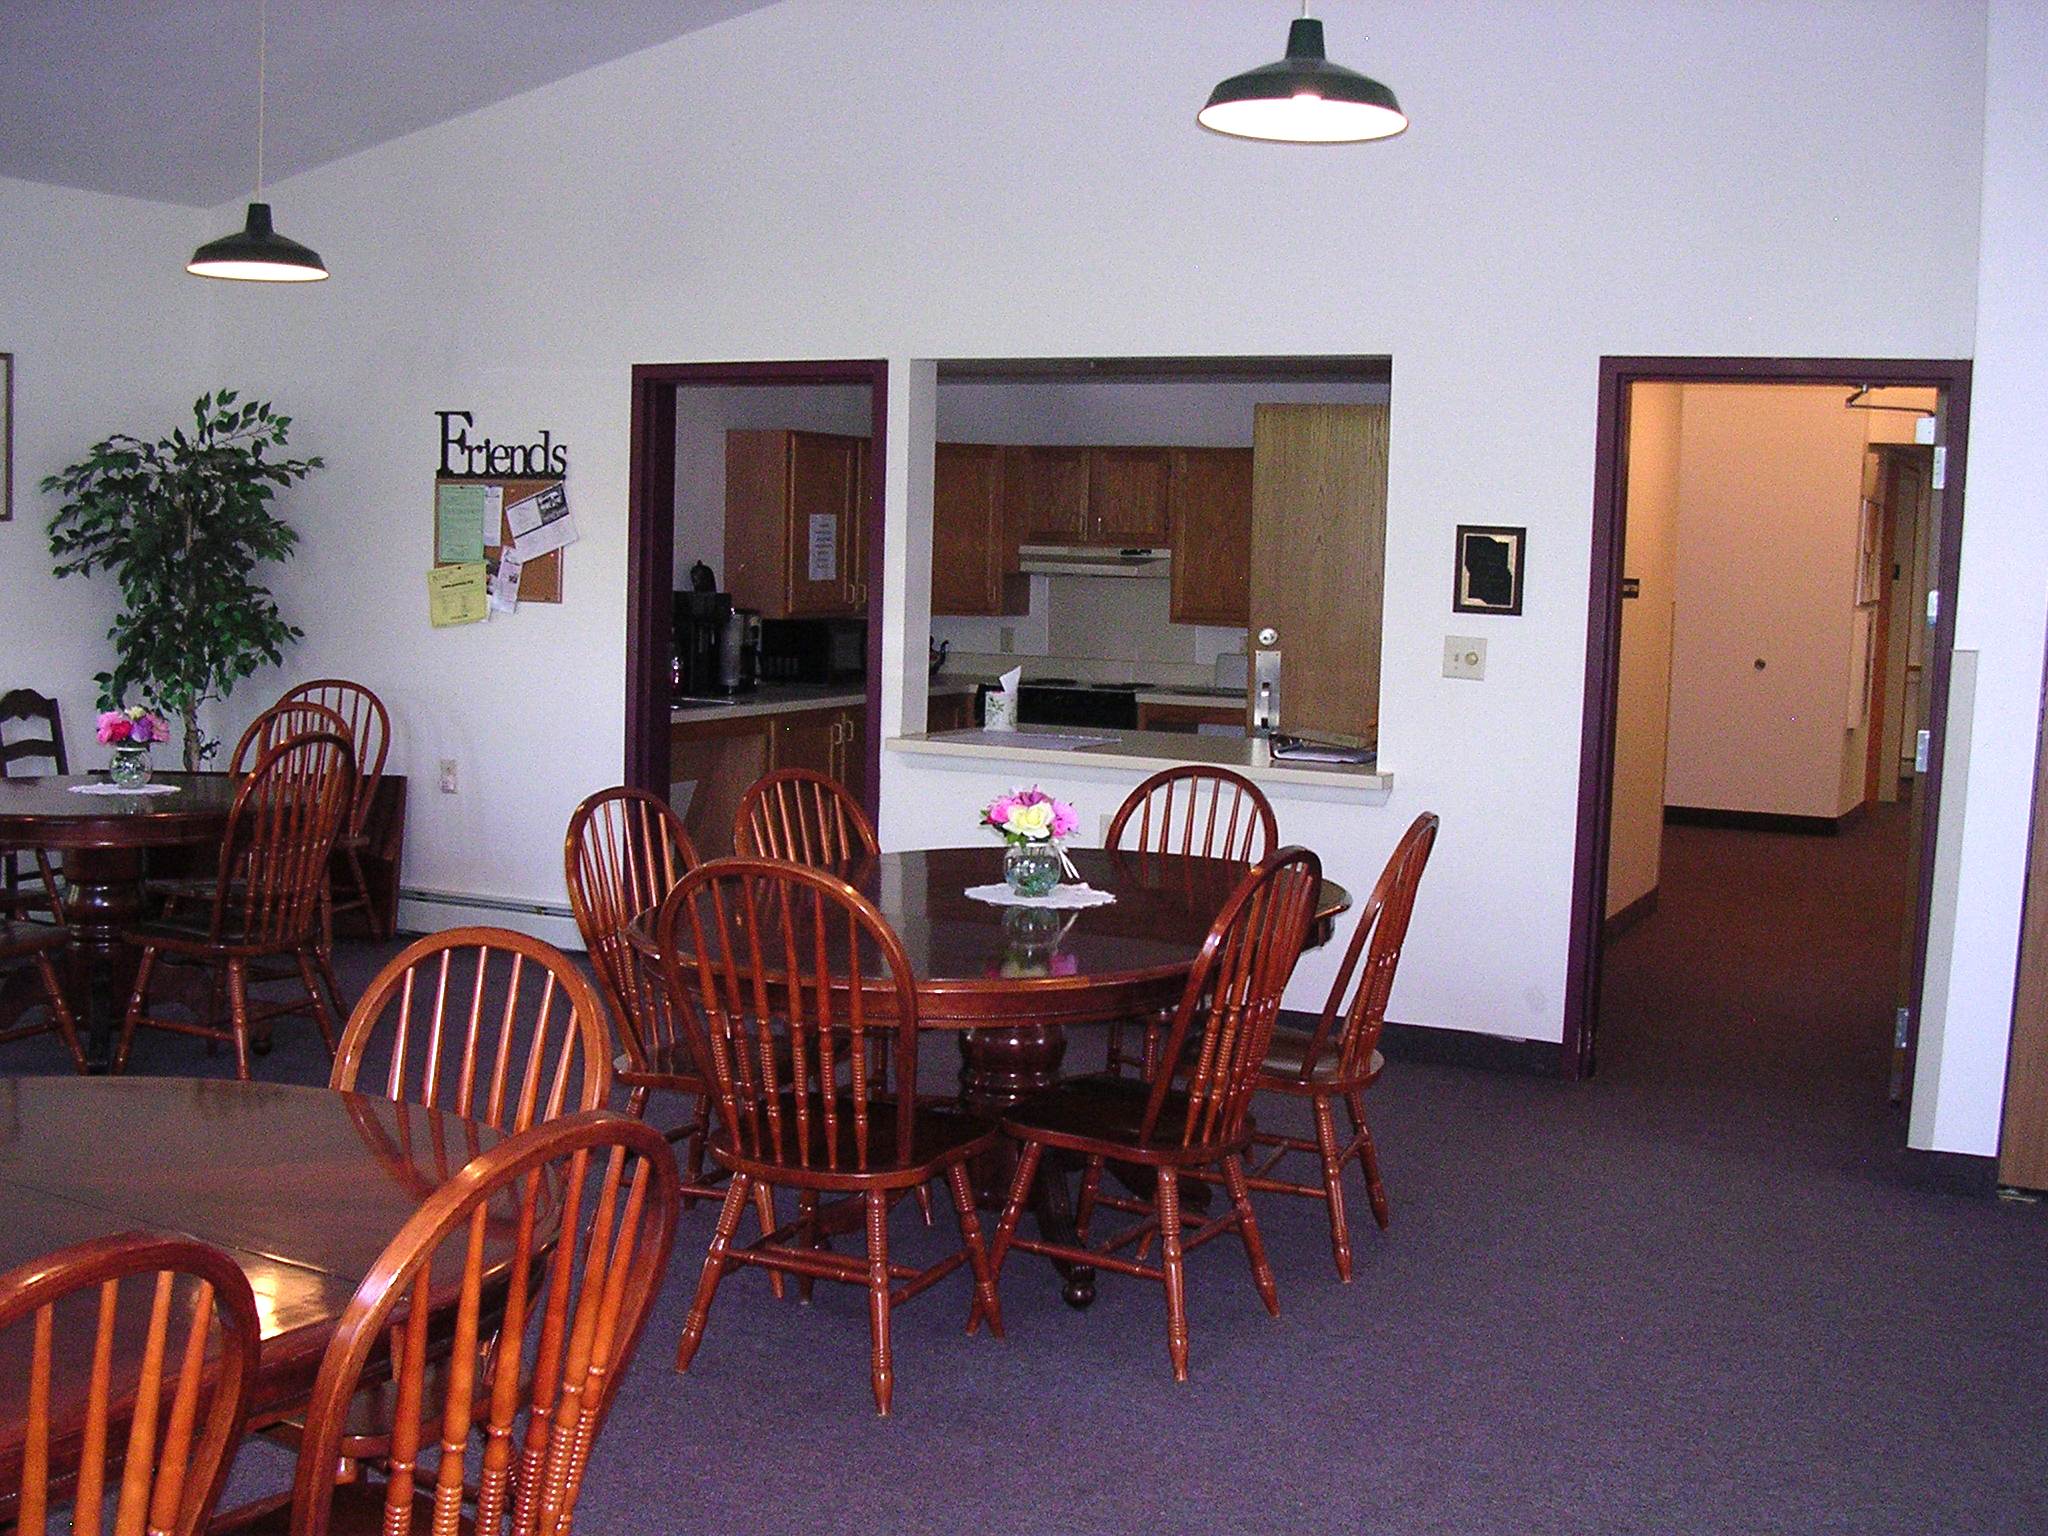 property management company syracuse ny image of community room and kitchen at colonial village